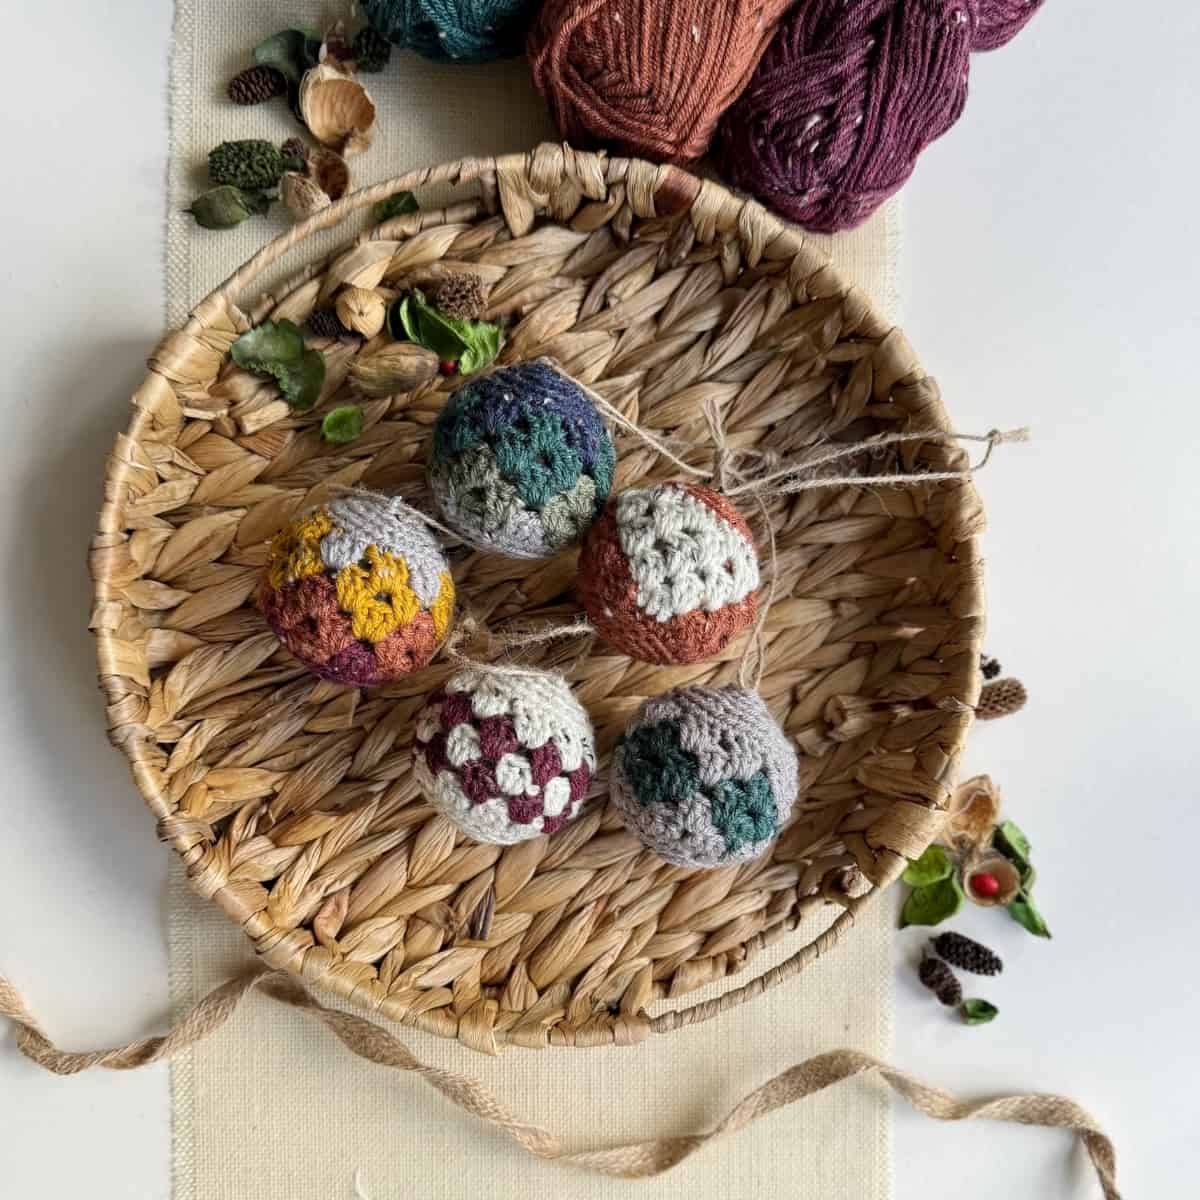 Crocheted ornaments in a basket on a table.